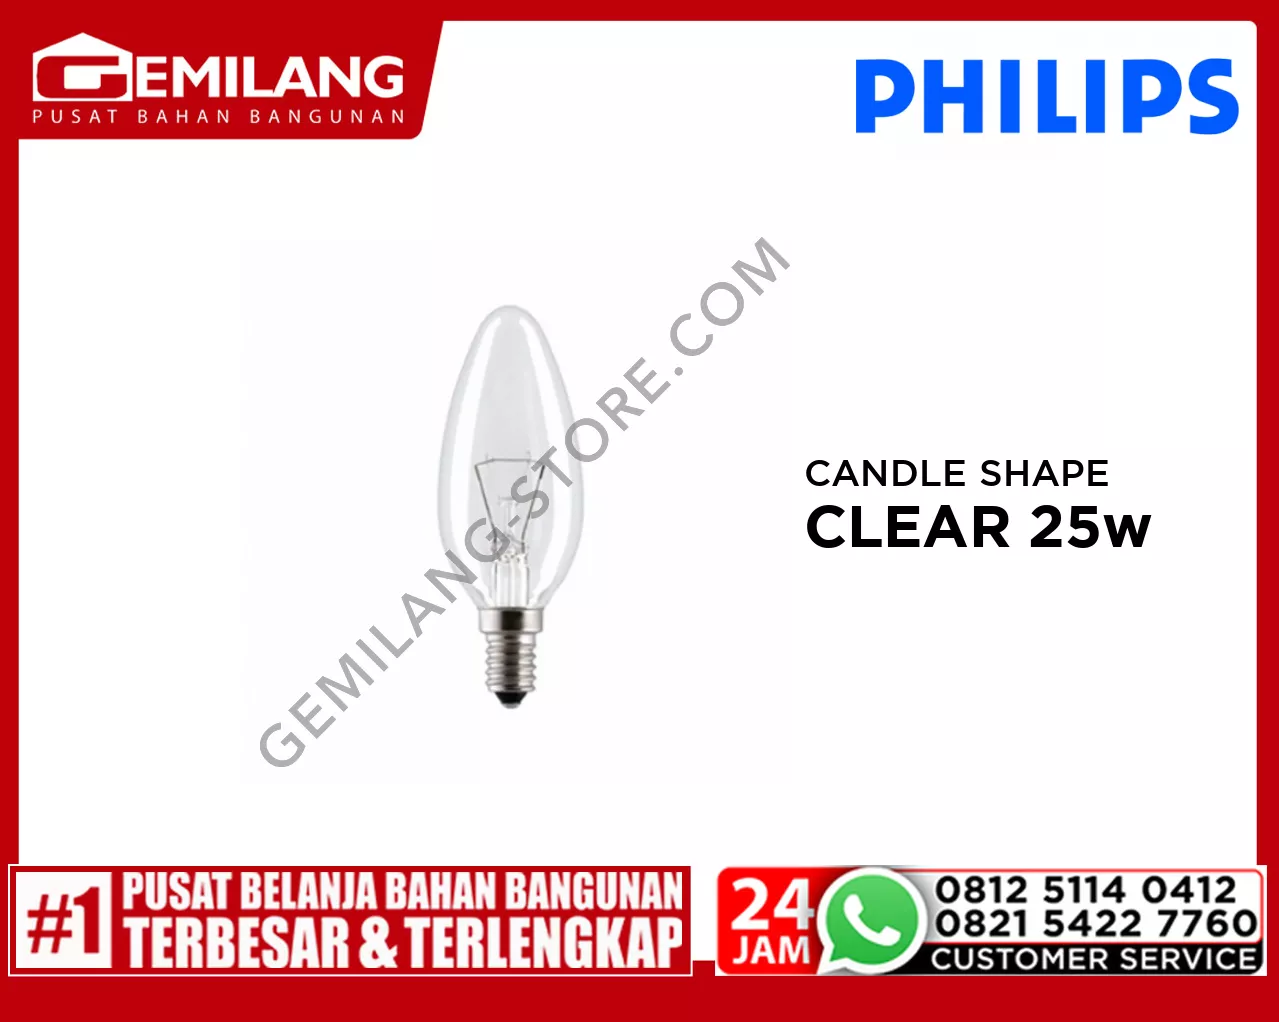 PHILIPS CANDLE SHAPE CLEAR 25w